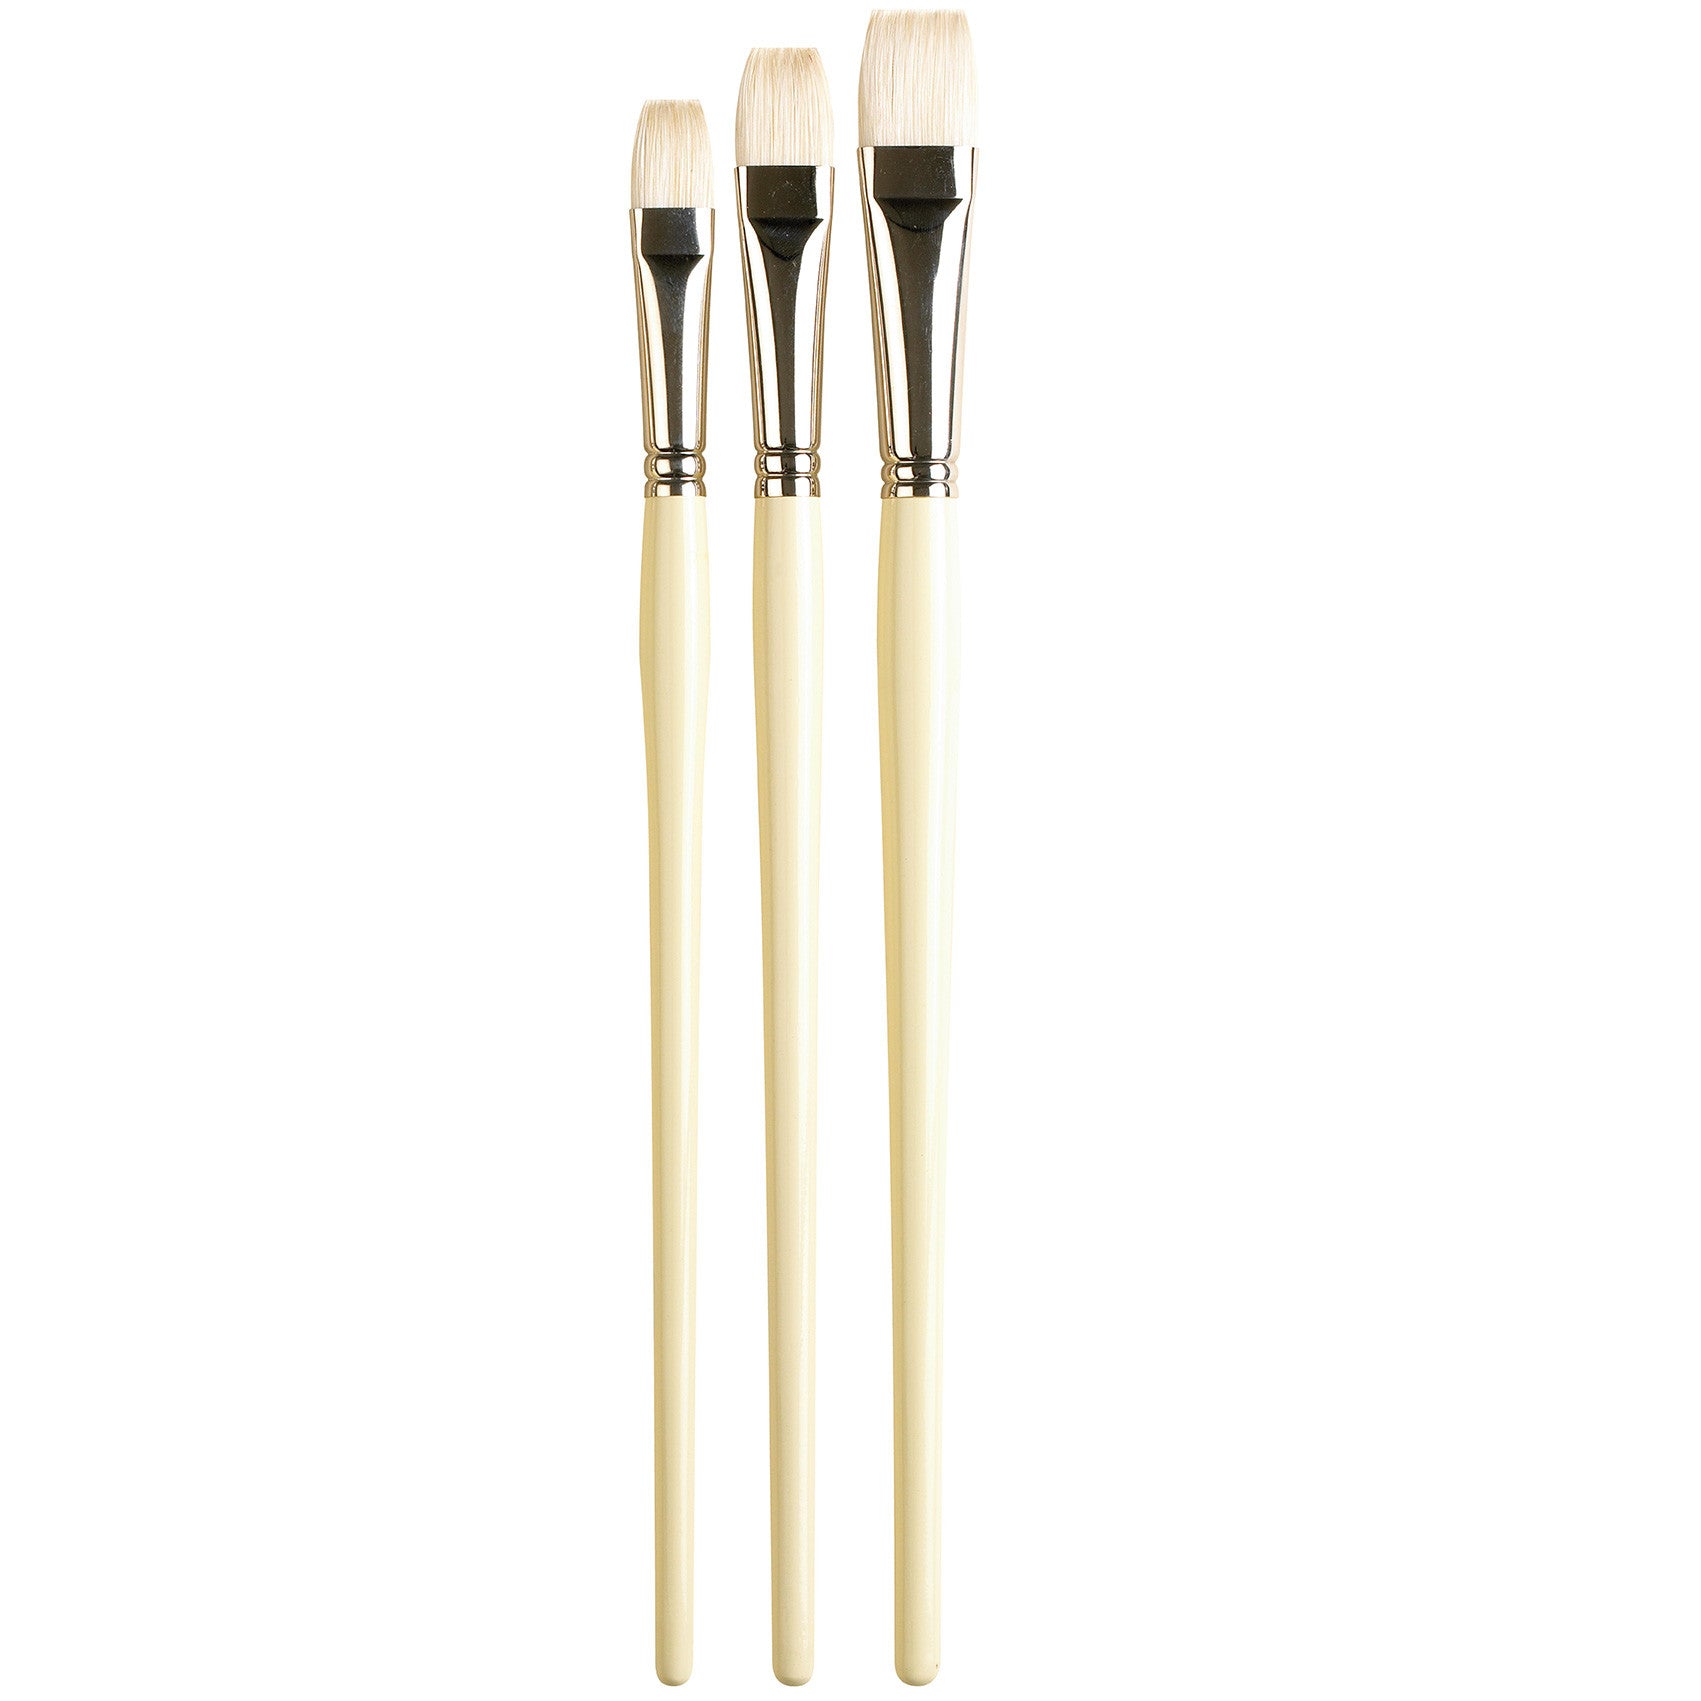 Series B from Pro Arte offers a collection of quality hog hair brushes at a cost-efficient rate compared to Series A, with bristles sourced from Chinese Chungking. These brushes are ideal for blending and creating skies and landscape effects, and feature seamless nickeled ferrules and long cream-polished handles.